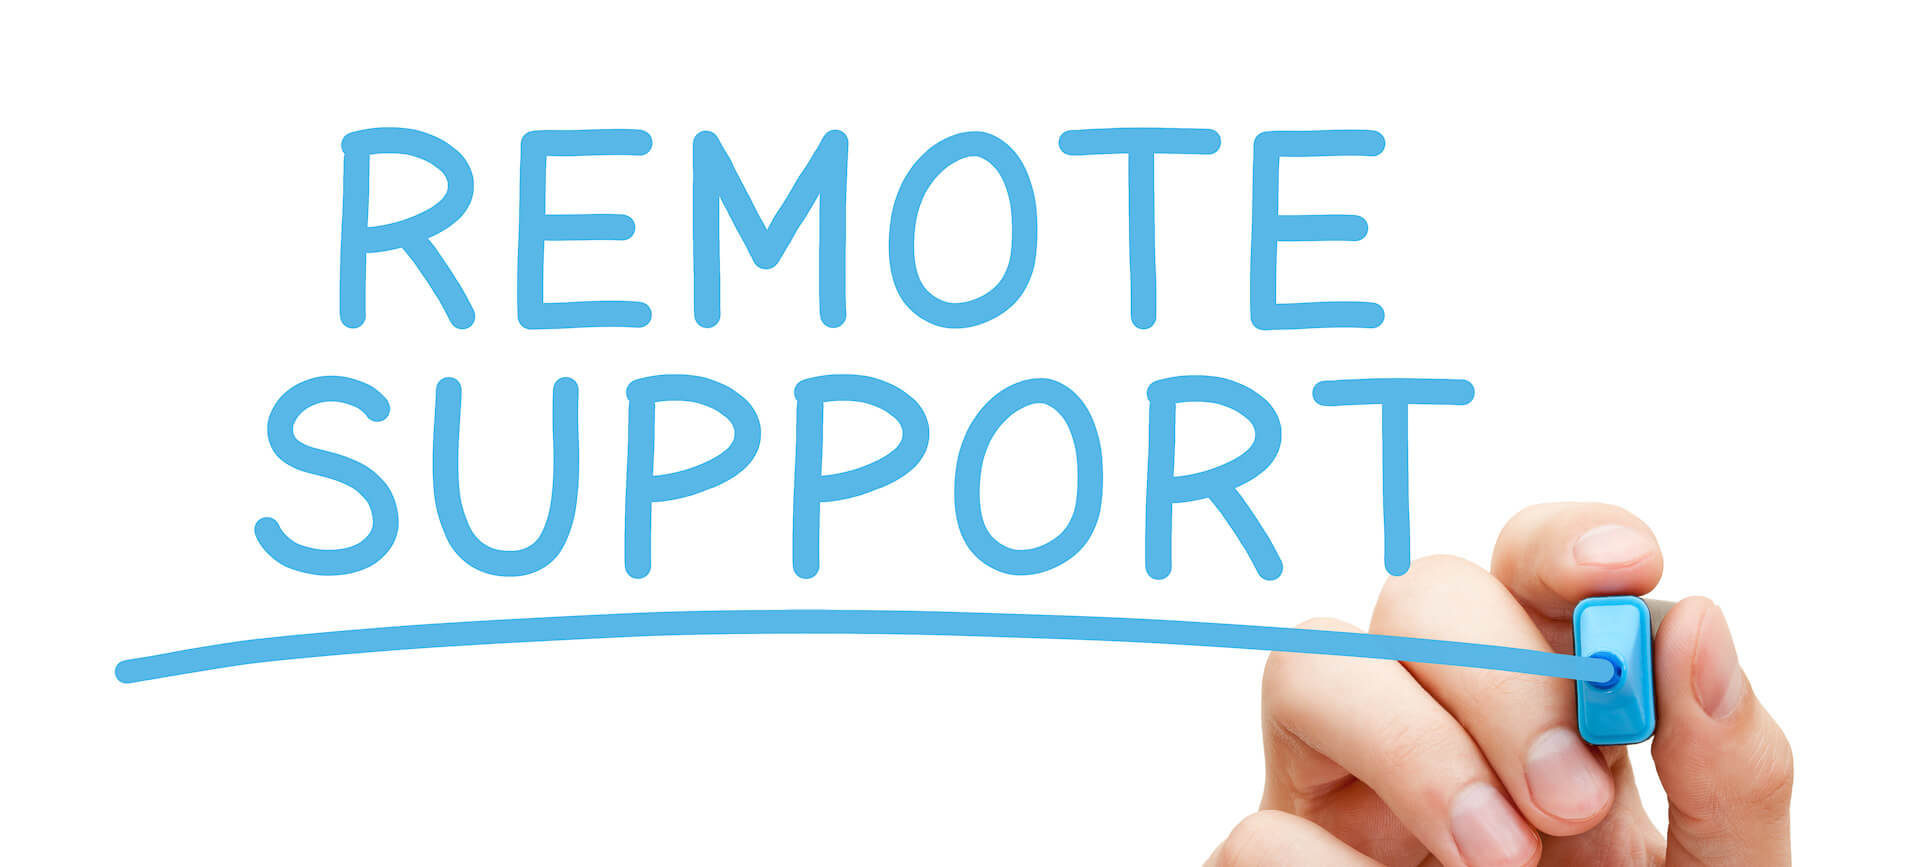 remotely support